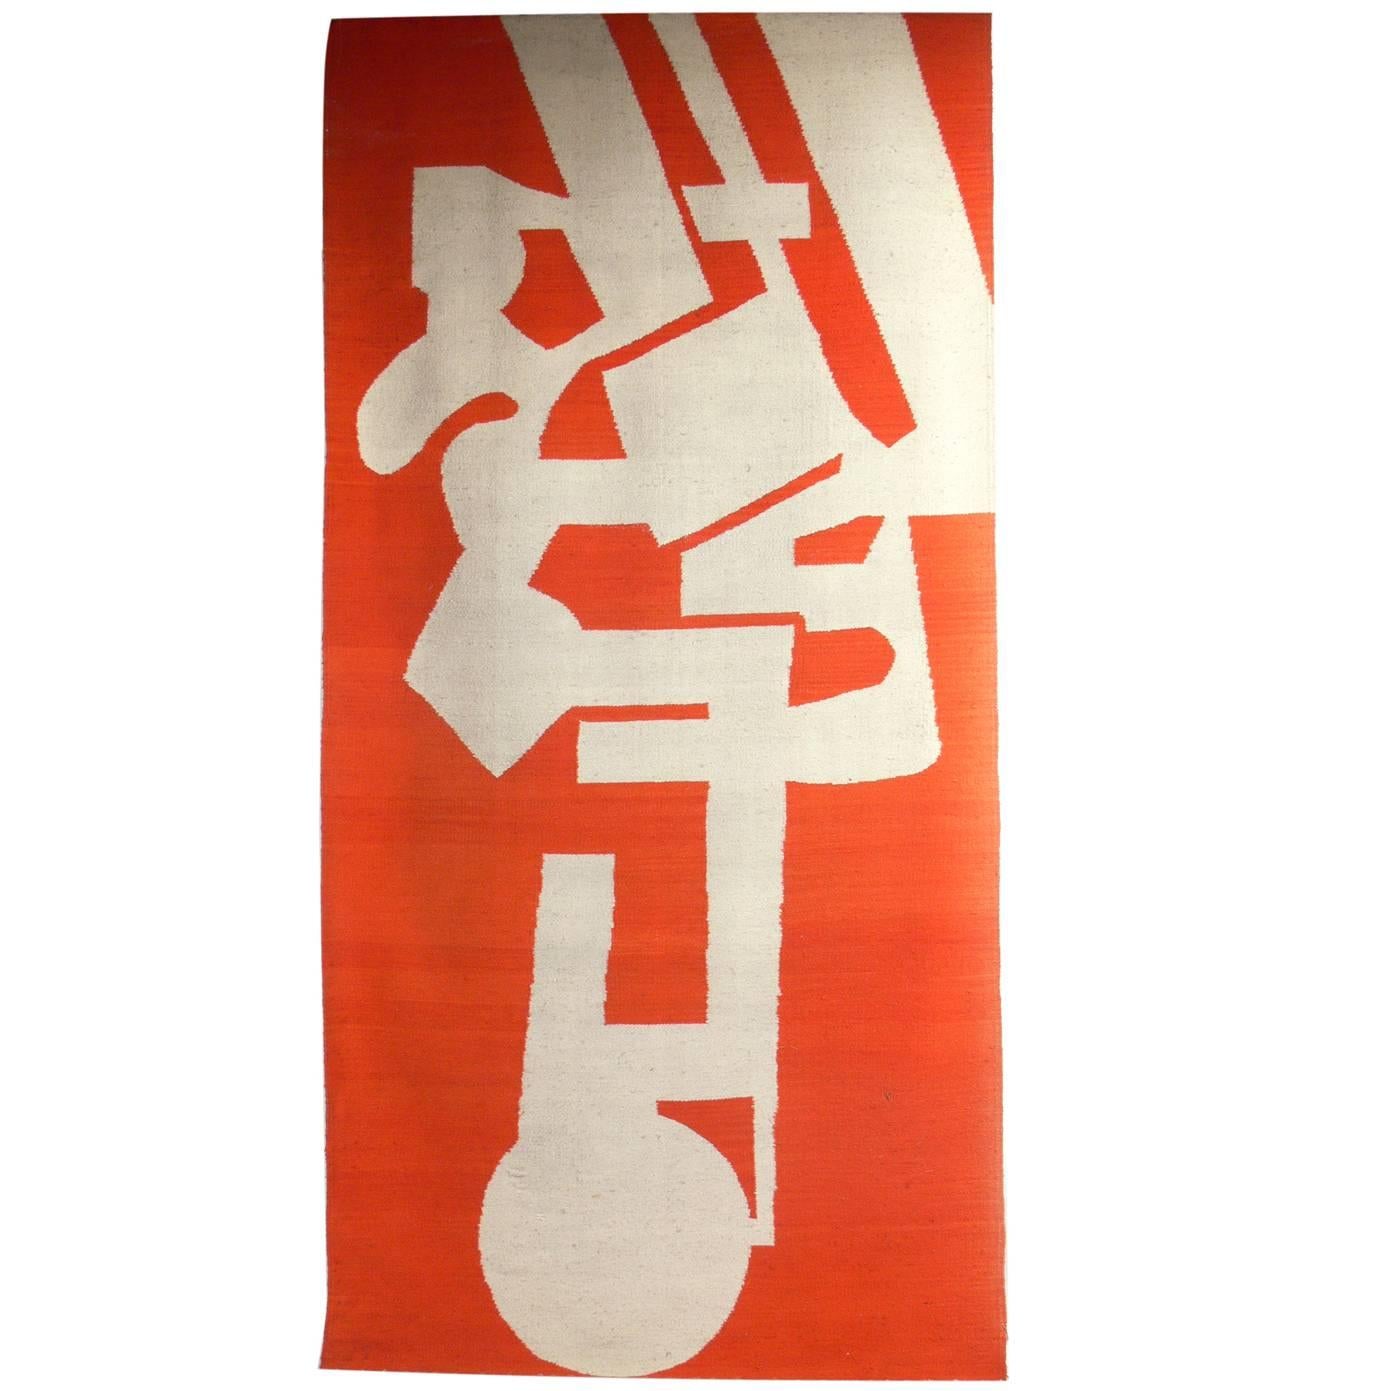 Large-Scale Modernist Tapestry in Vibrant Orange and White